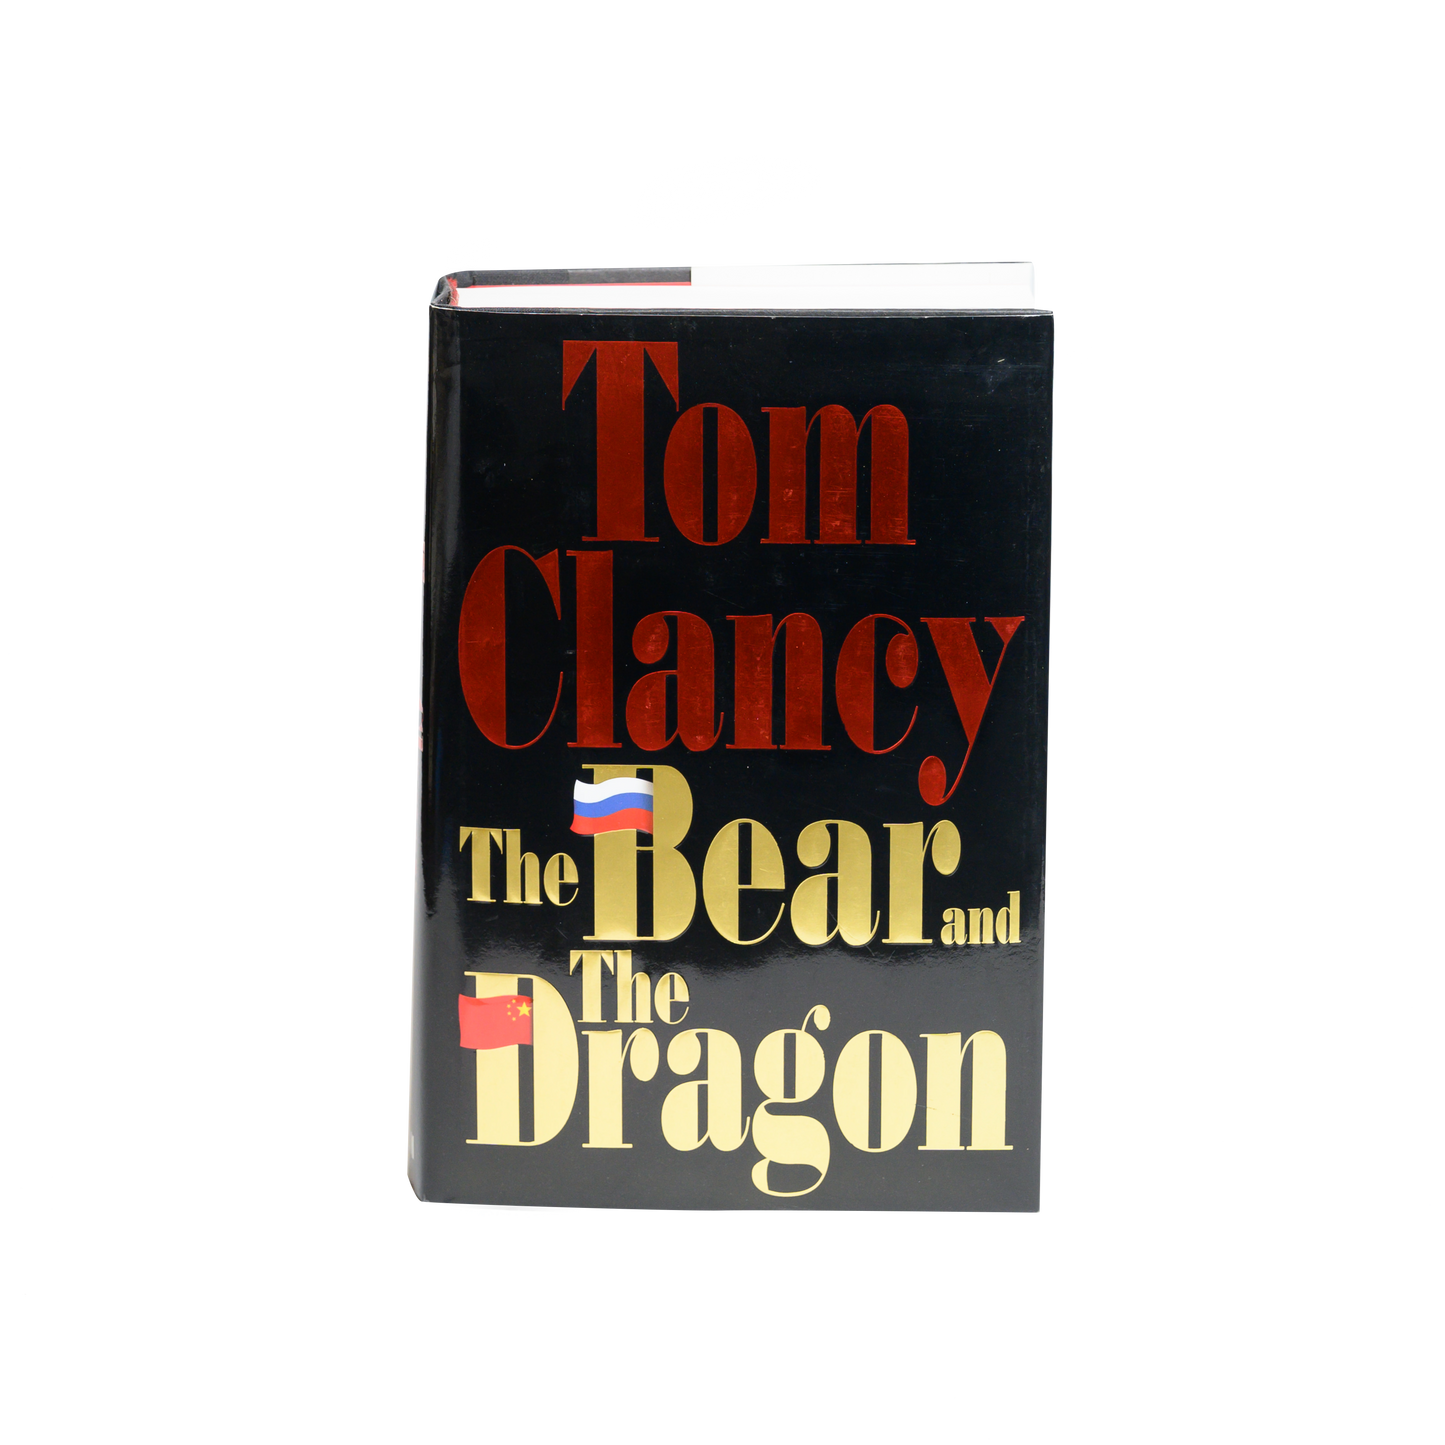 The Bear And The Dragon - 